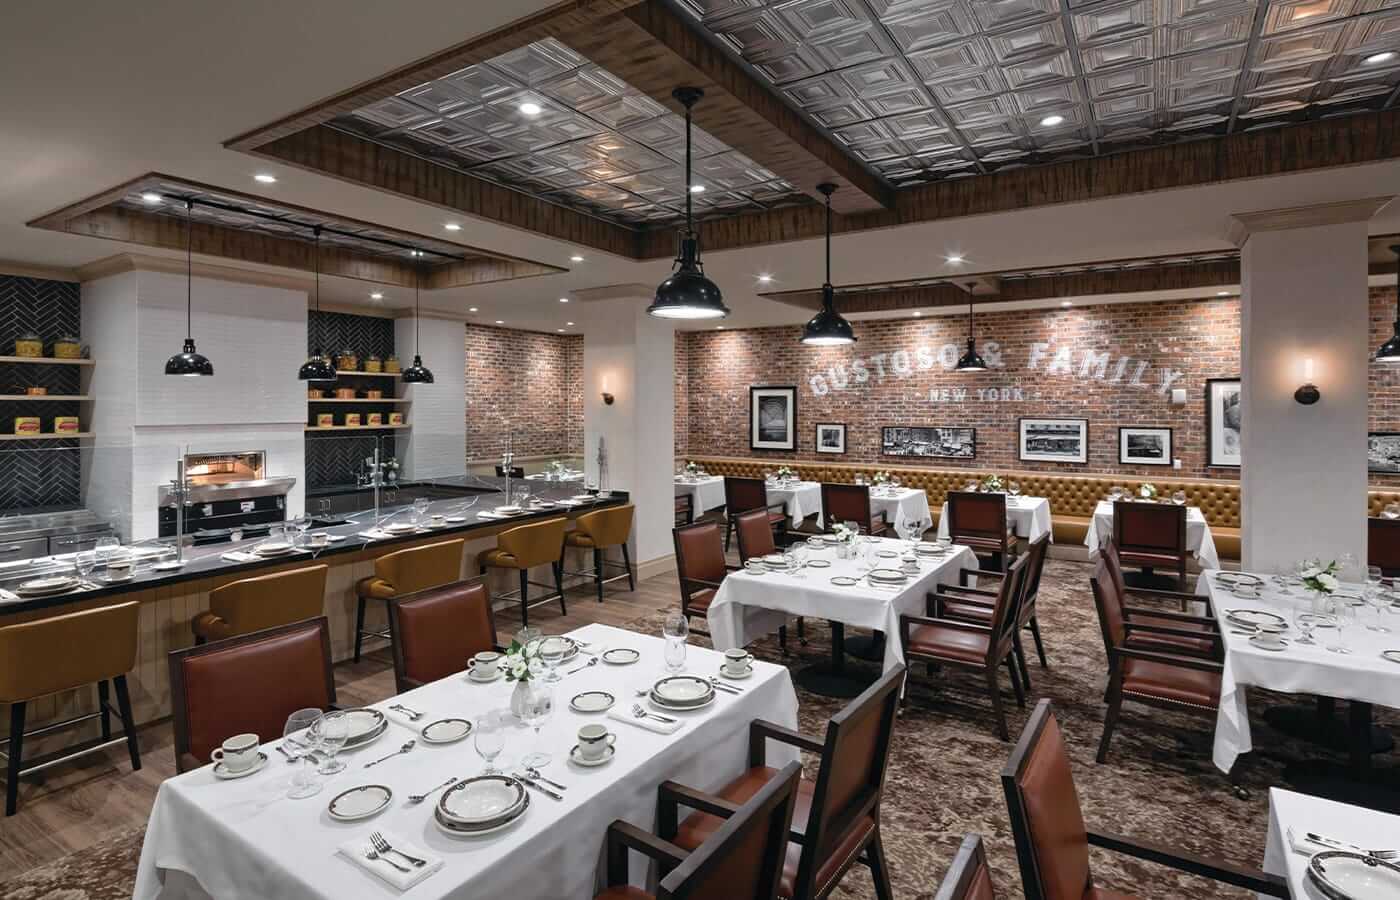 The Mediterranean style restaurant found on-site at The Watermark at Brooklyn Heights.